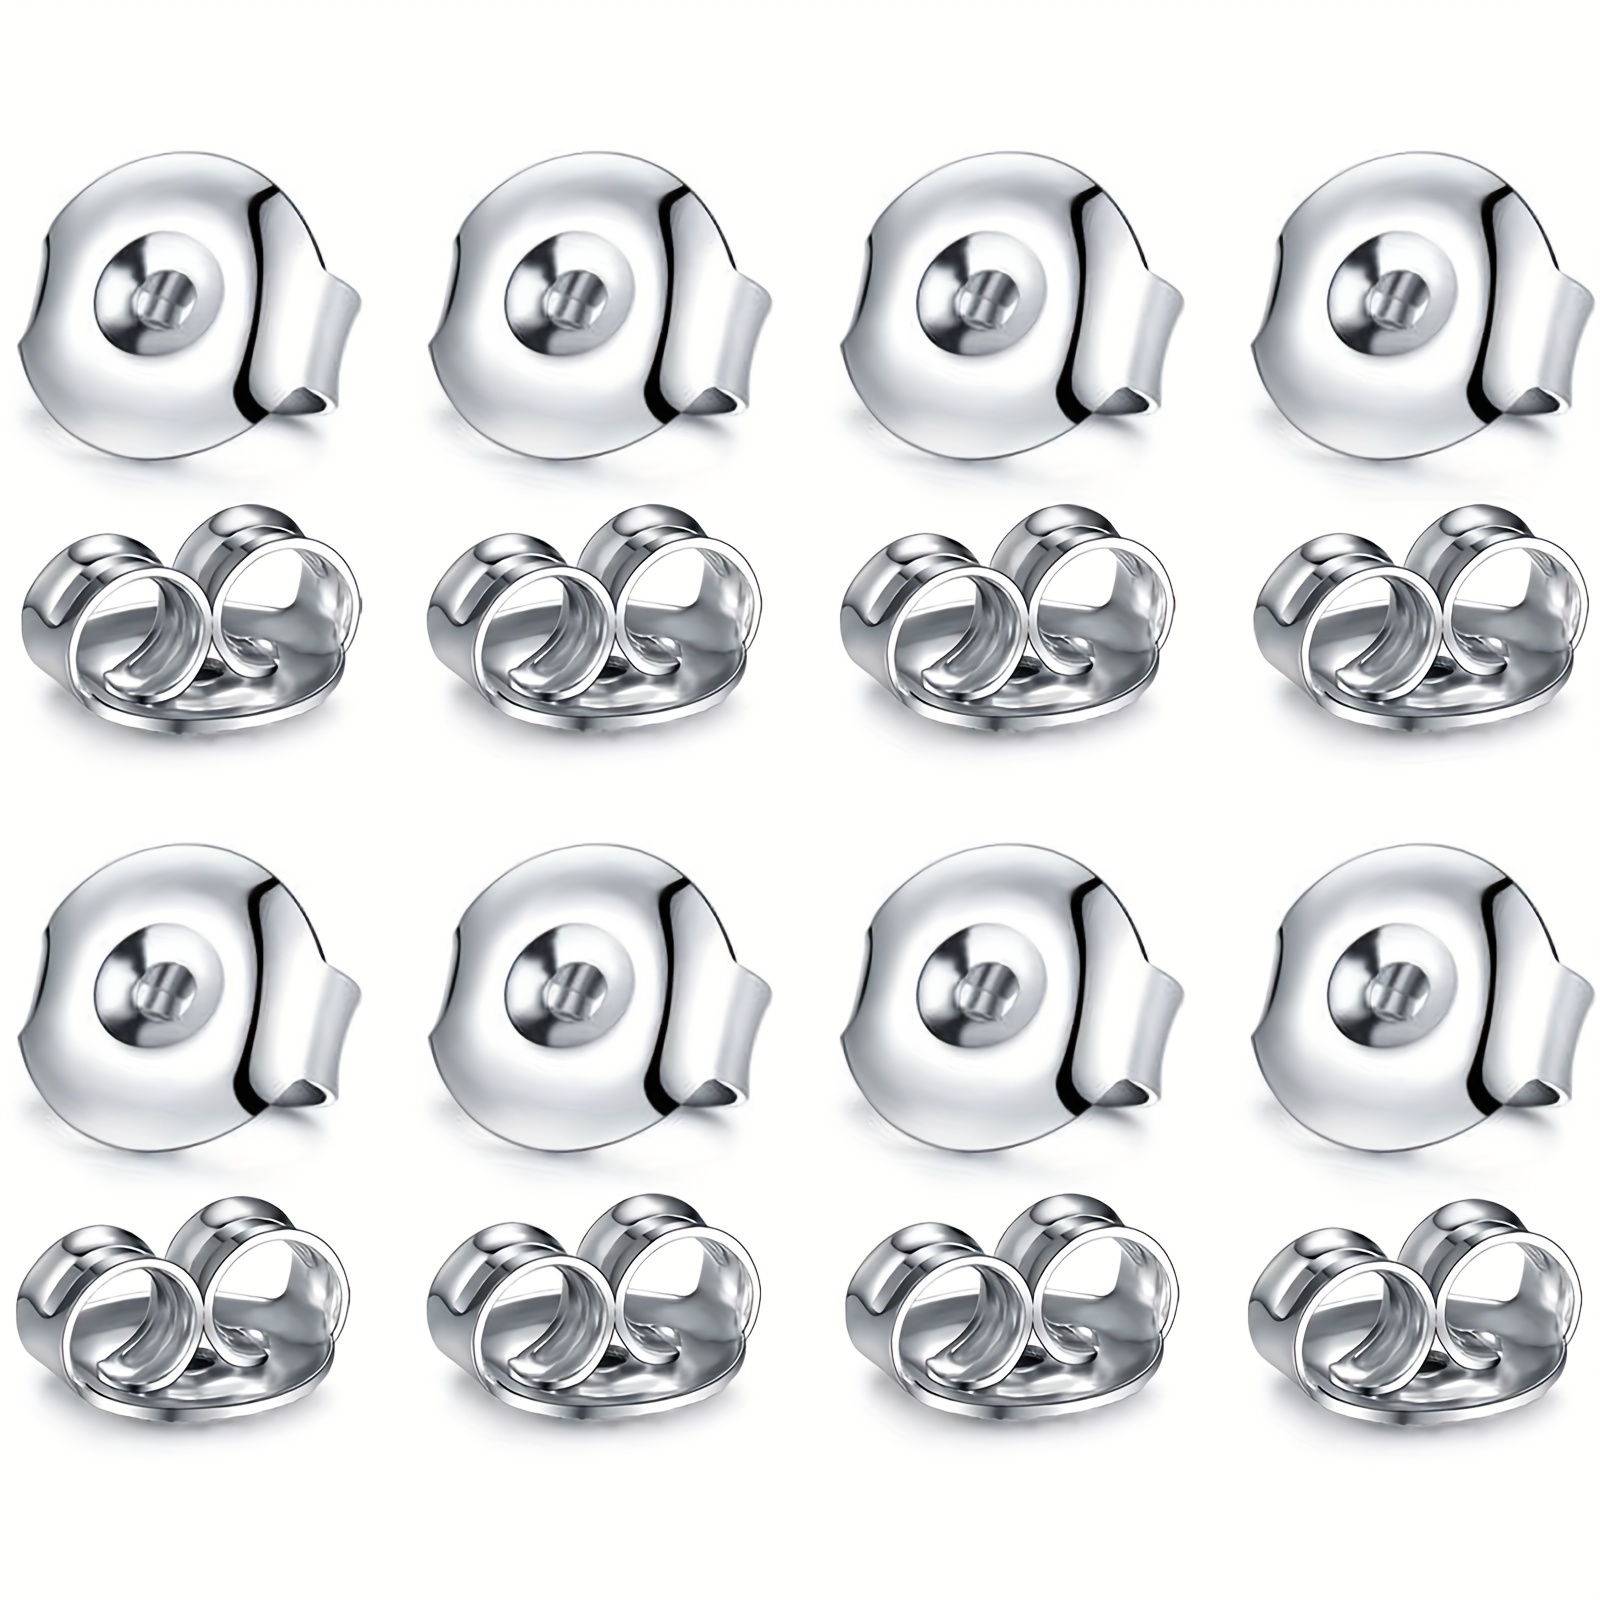  Locking Earring Backs For Studs-Secure Replacement Earring Back  in Stainless Steel- Locking Earring Backs Secure for Diamond Studs,  Hypoallergenic Replacements Earring Backings for Notched Post: Clothing,  Shoes & Jewelry